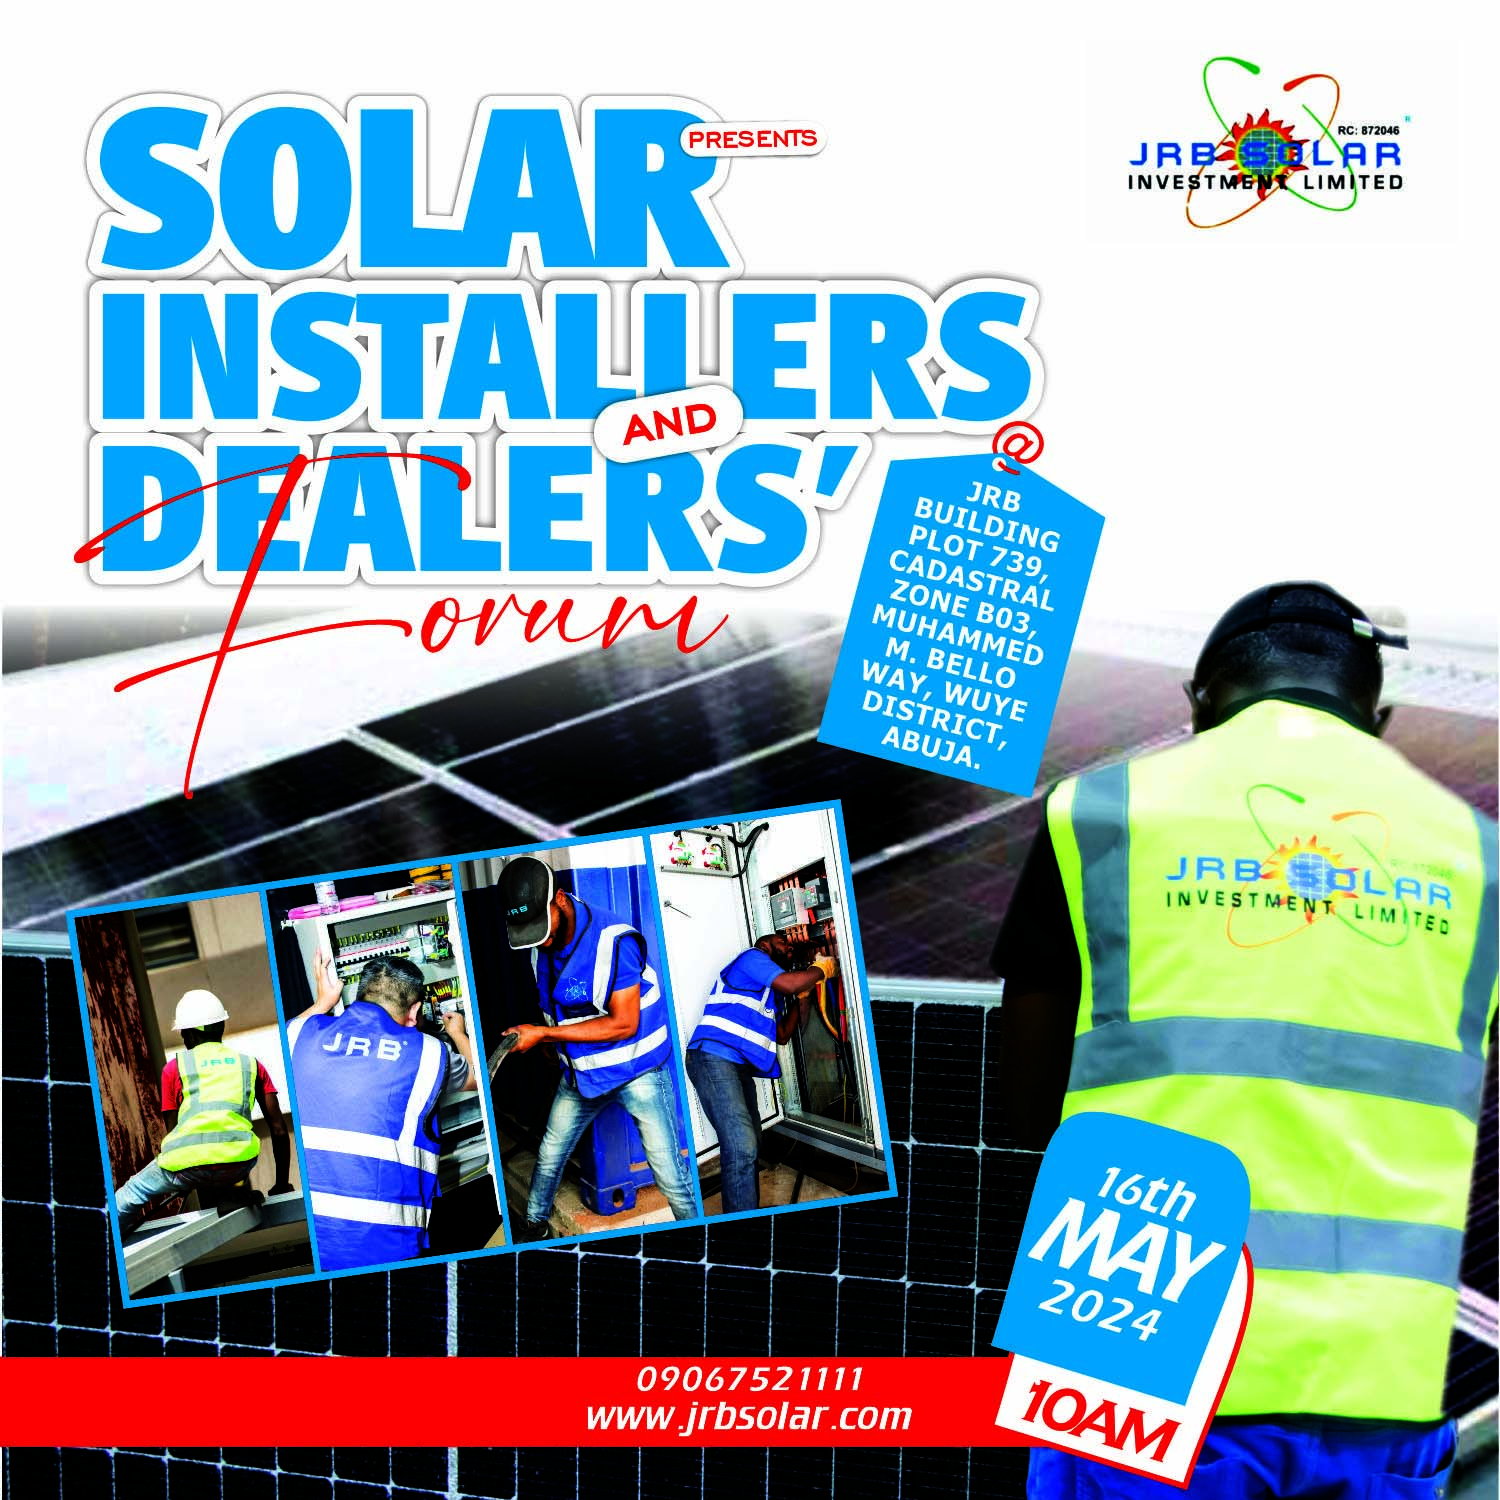 JRB Solar Installers and Dealers Forum